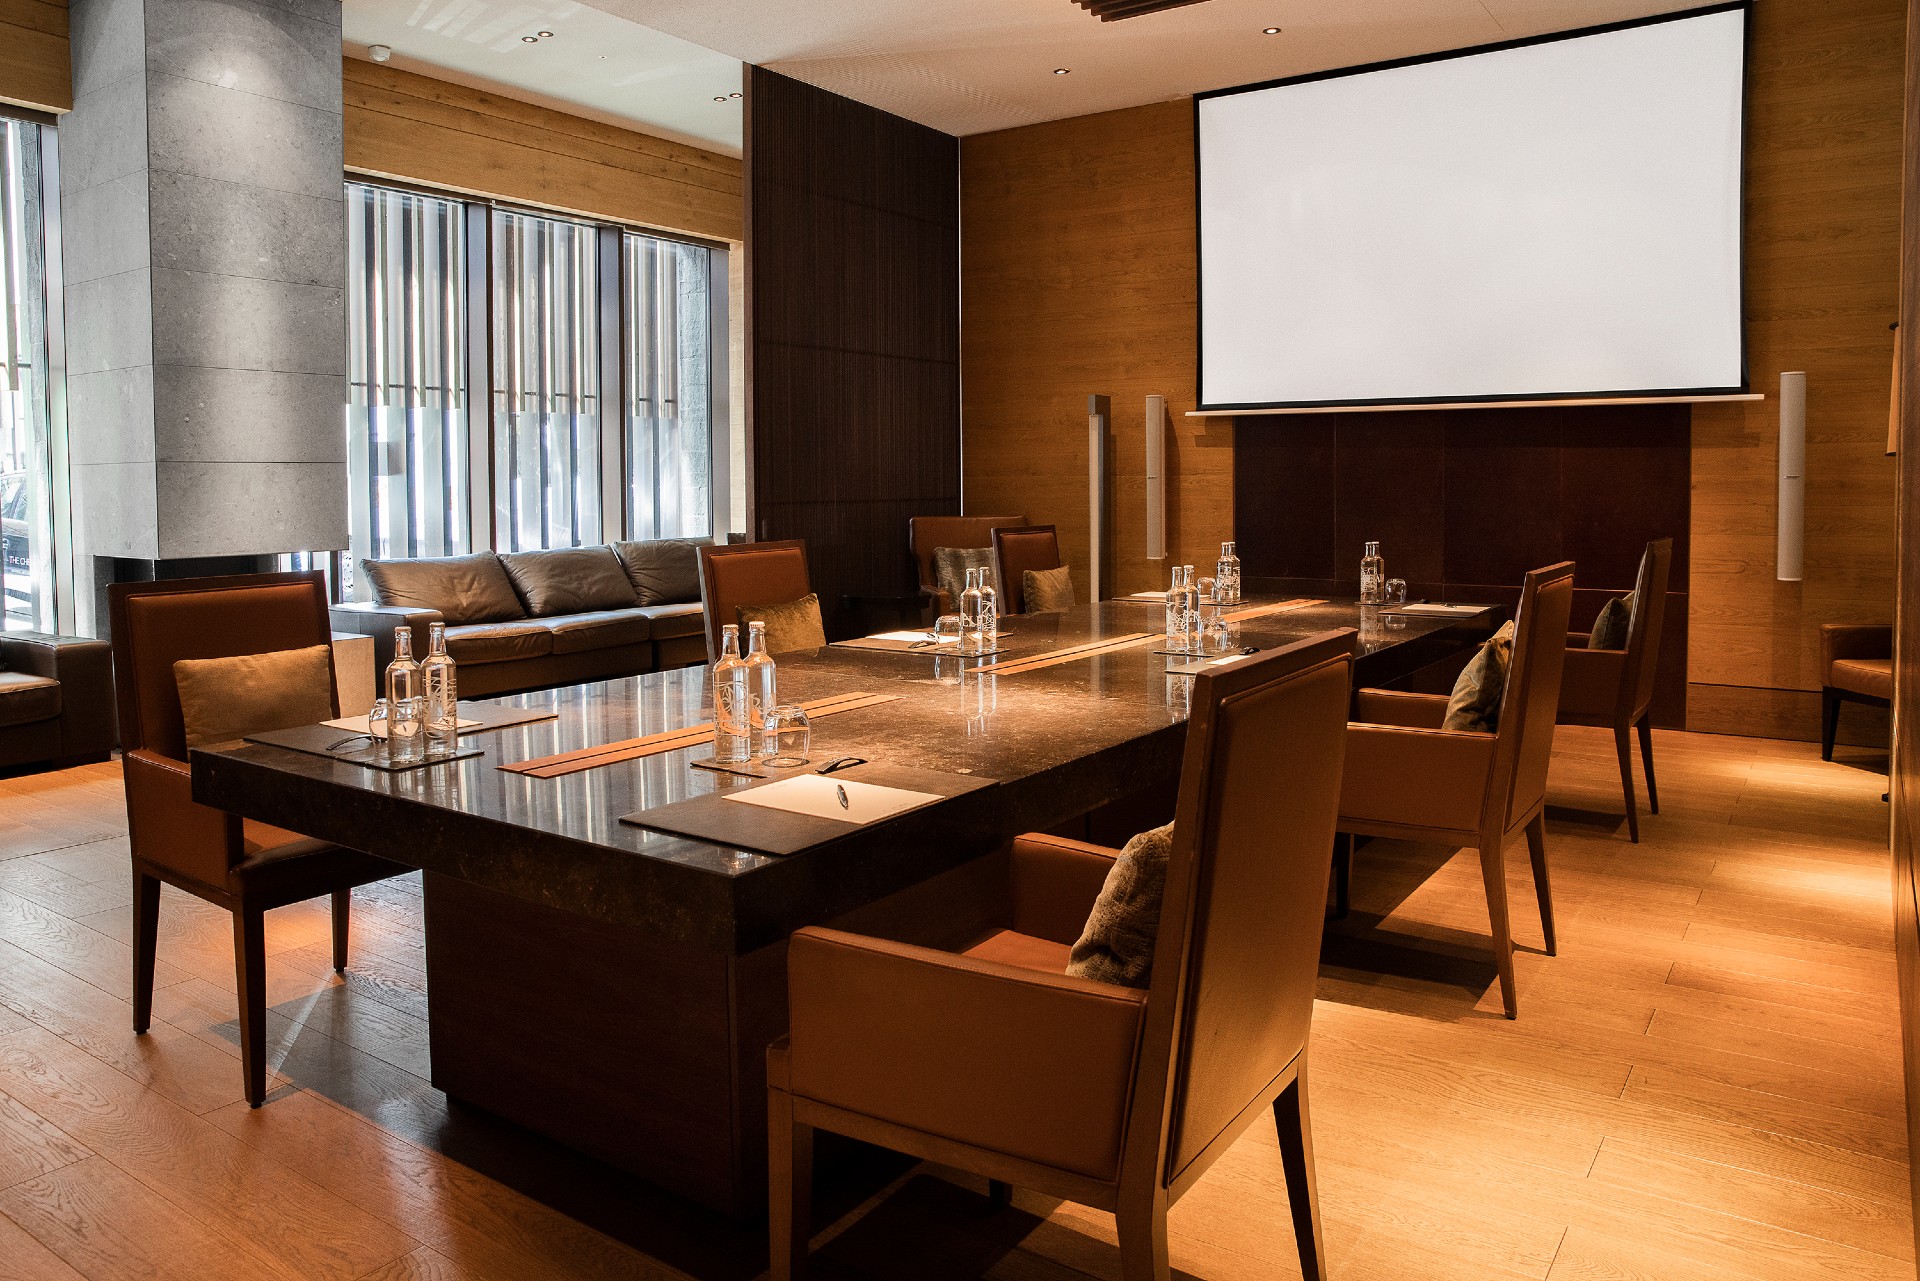 Meeting room at The Chedi Andermatt. A large marble table and elegant seating/furnishing.